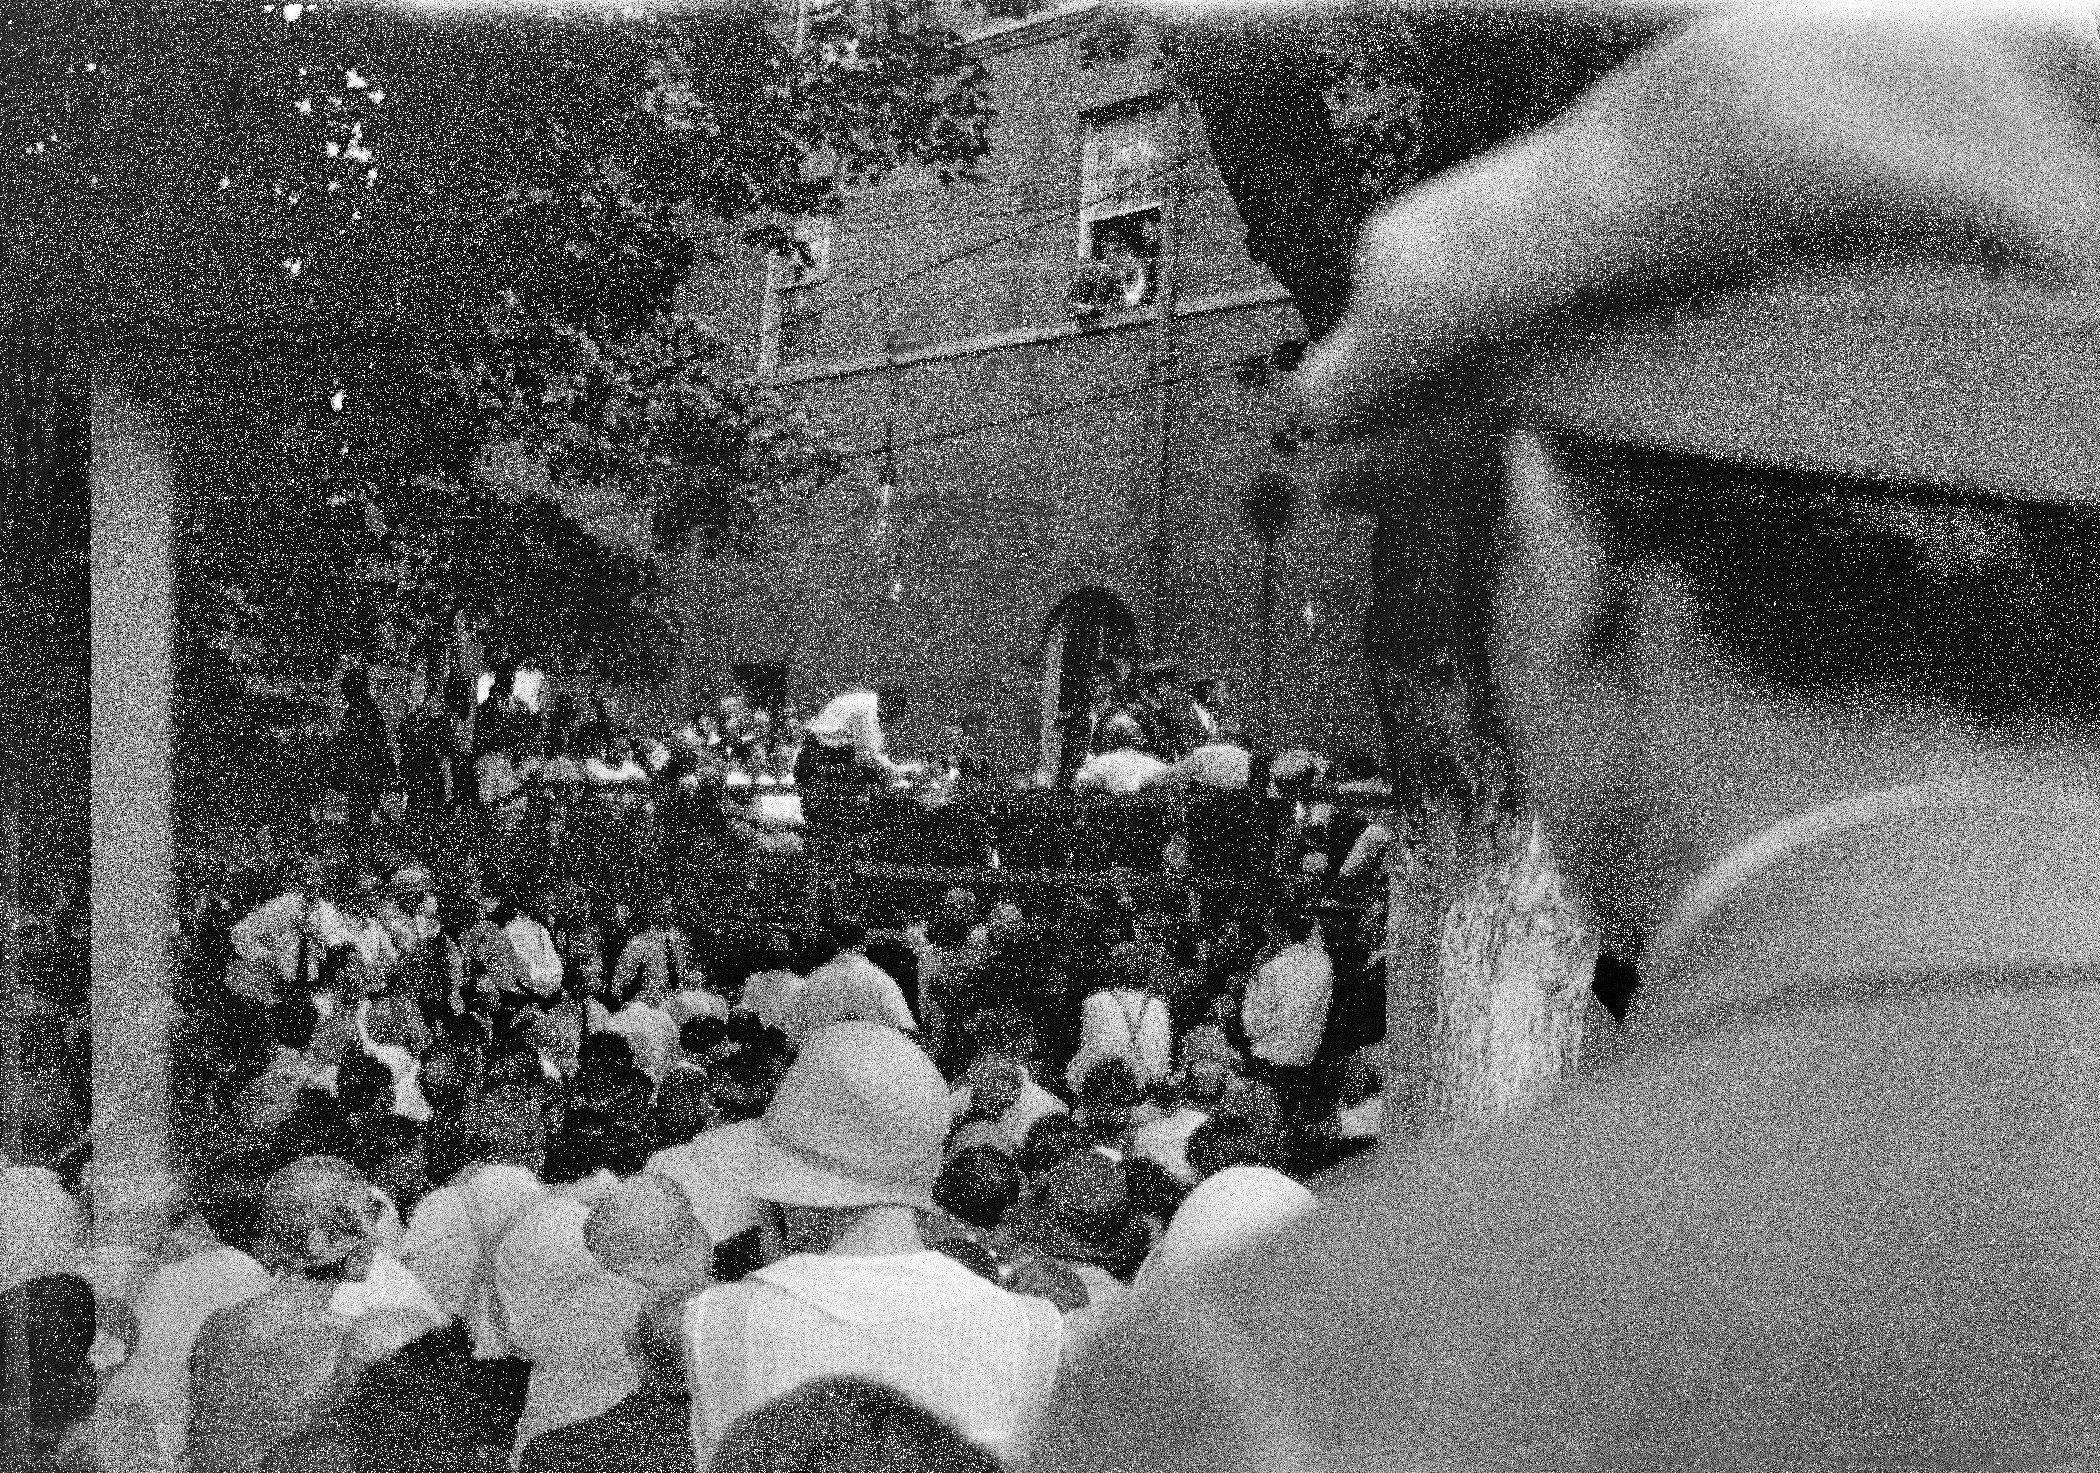 Clarence S. Darrow interrogating William Jennings Bryan, Scopes trial, Dayton, Tennessee, July 20, 1